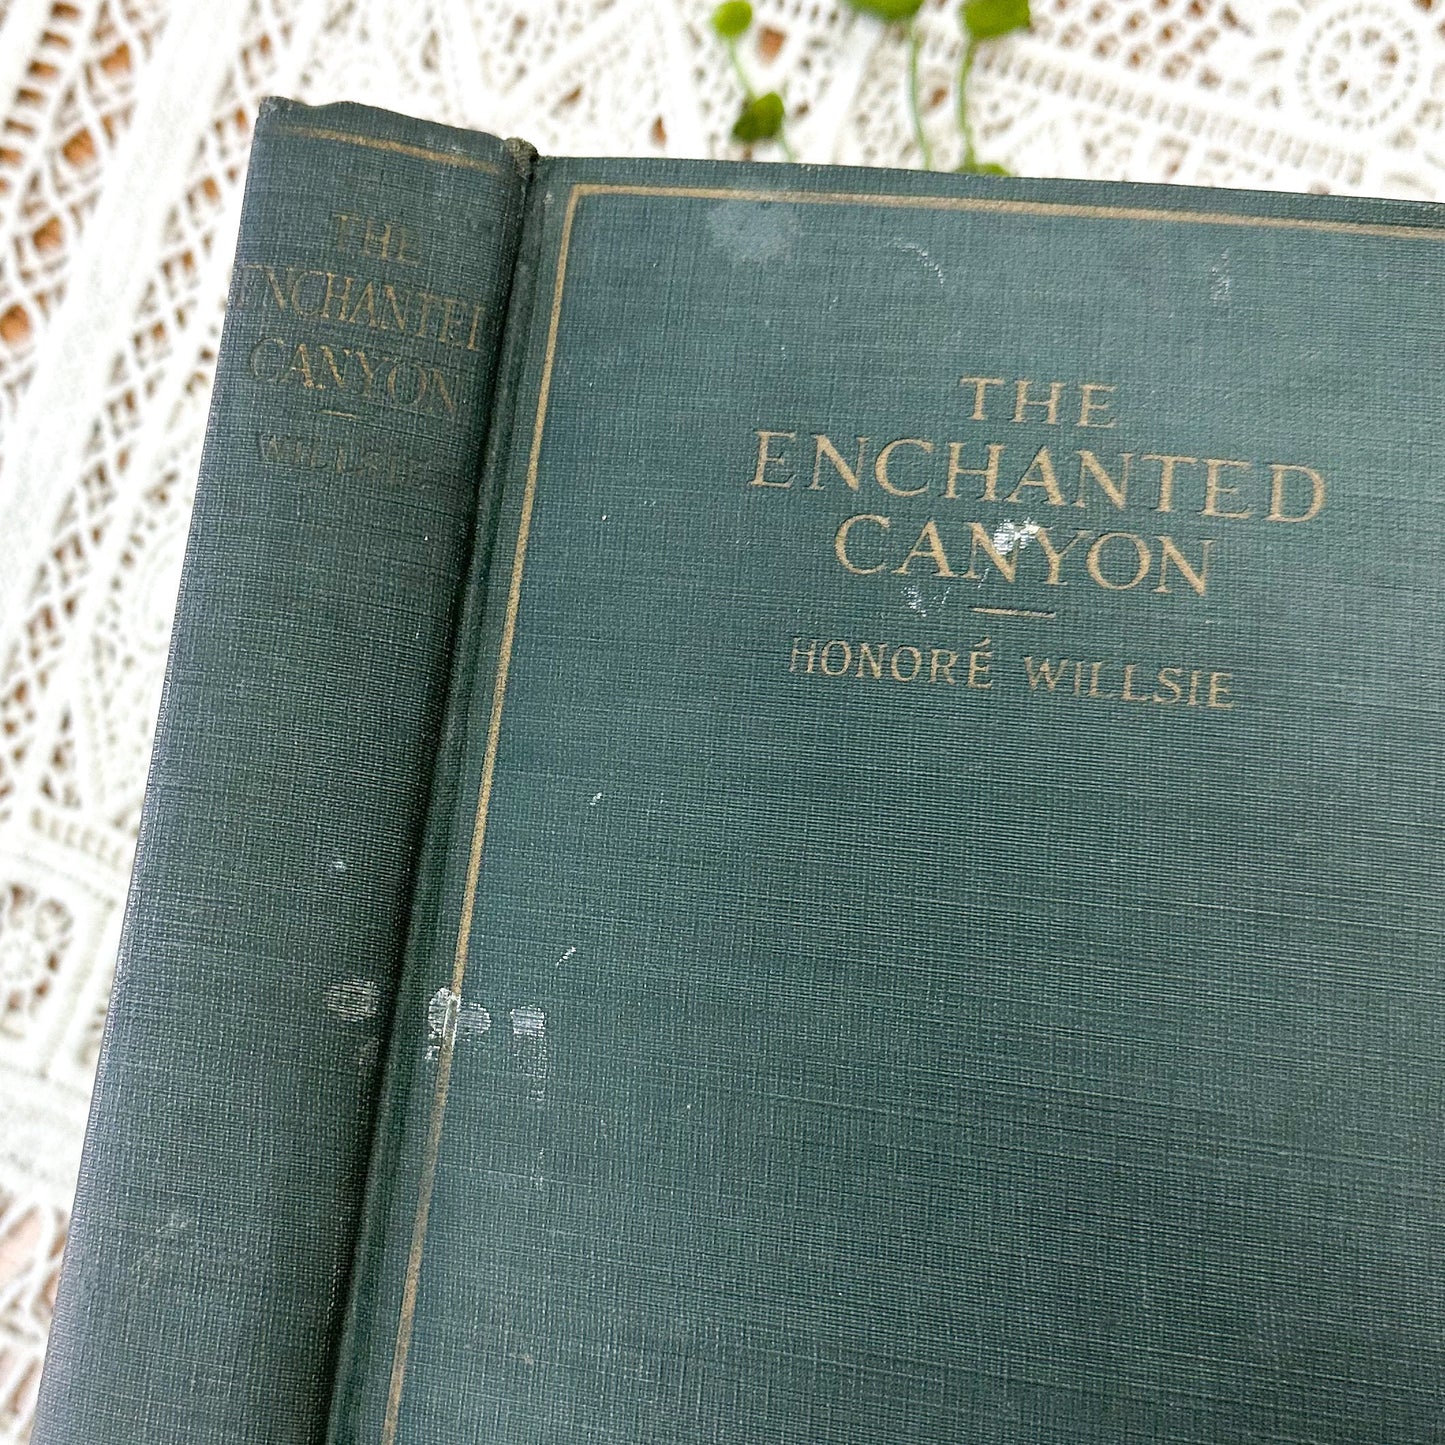 The Enchanted Canyon by Honore Willsie